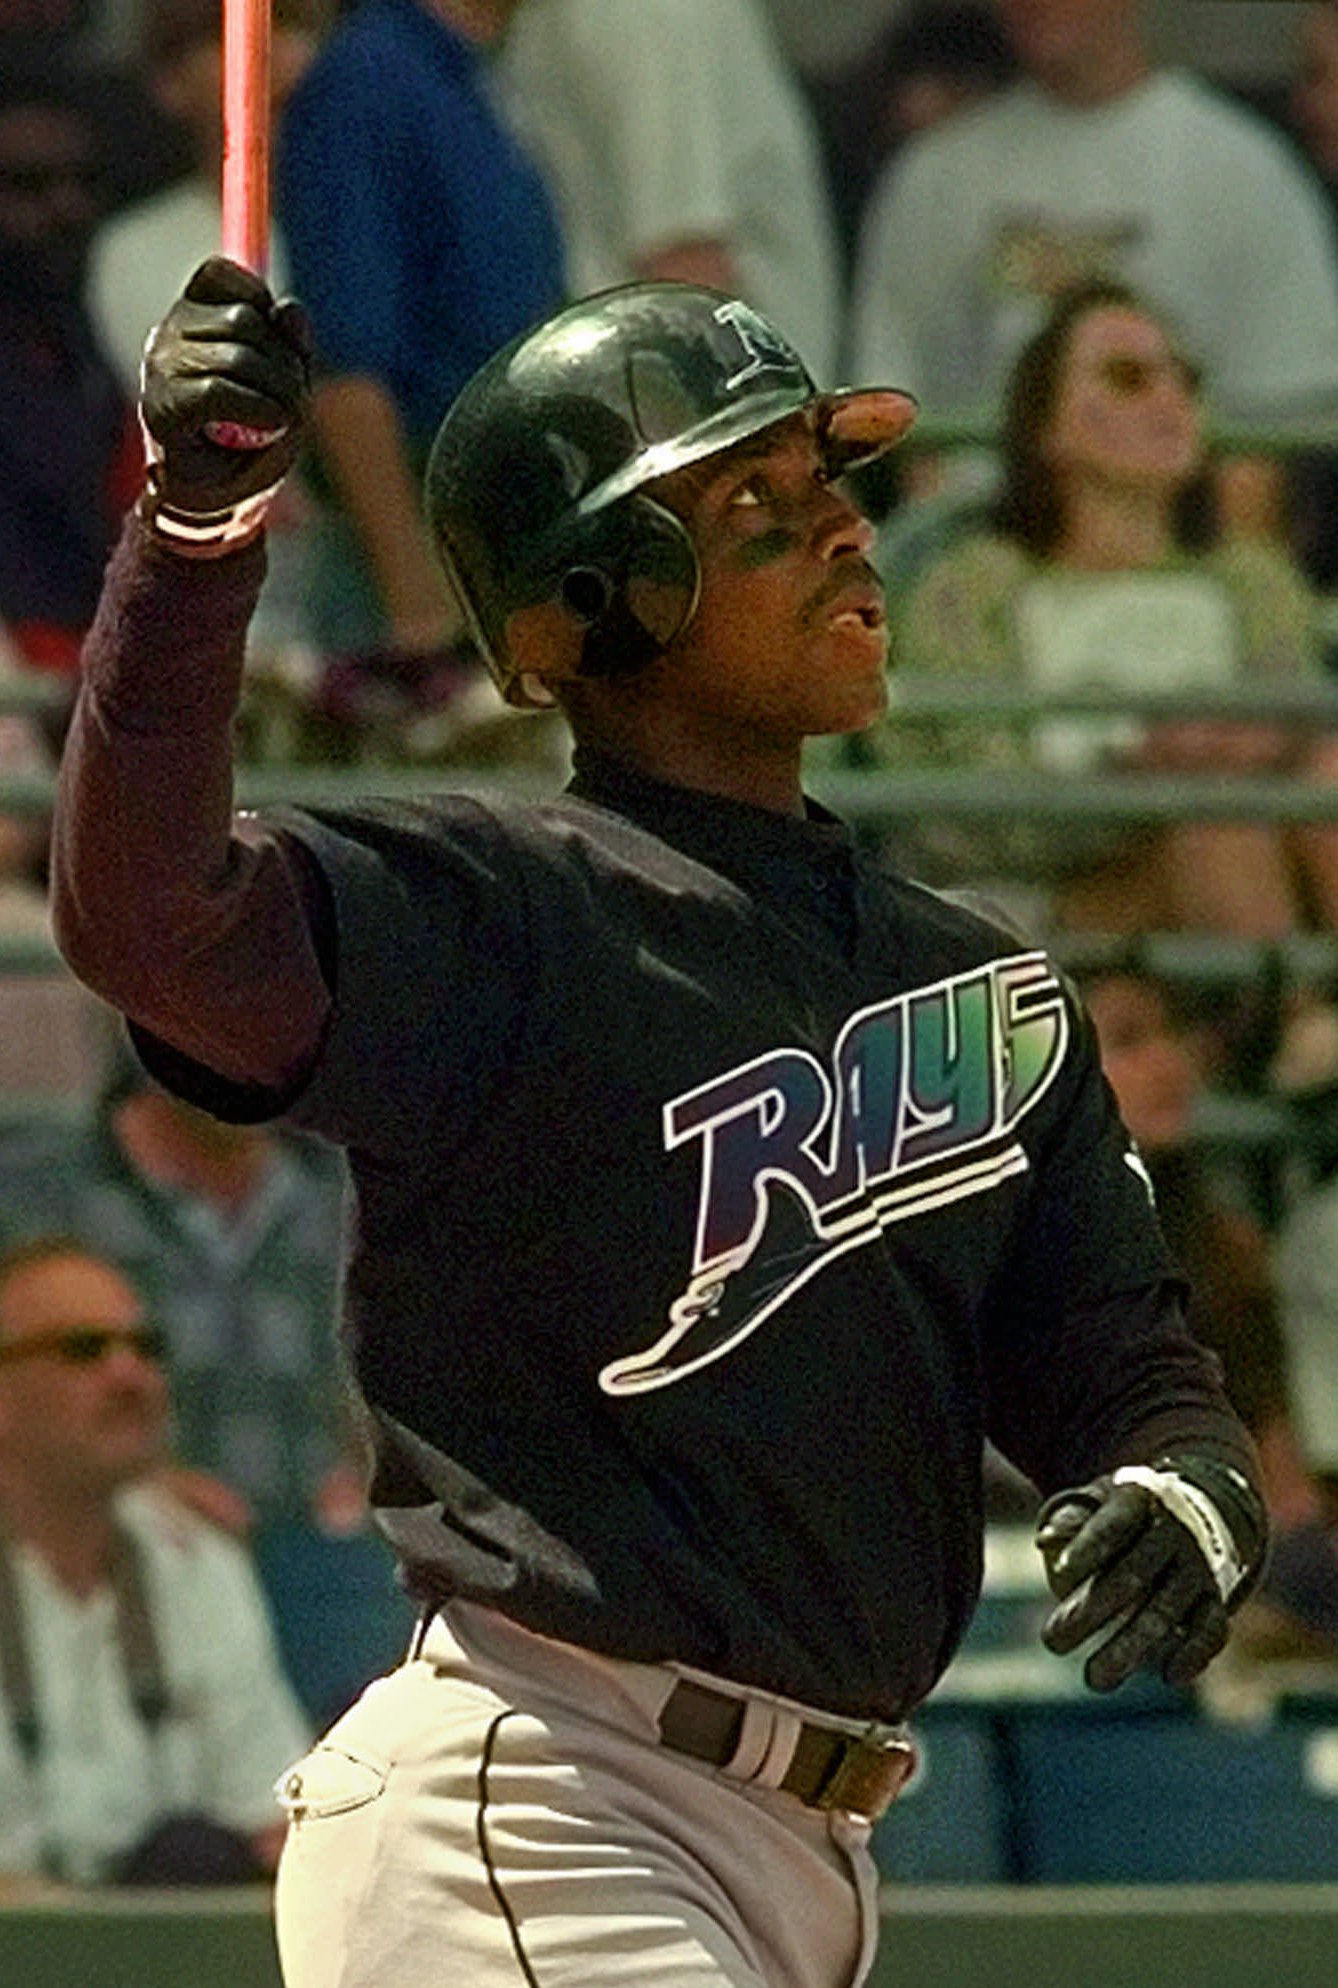 Florida Native Fred McGriff Elected to Baseball Hall of Fame - ITG